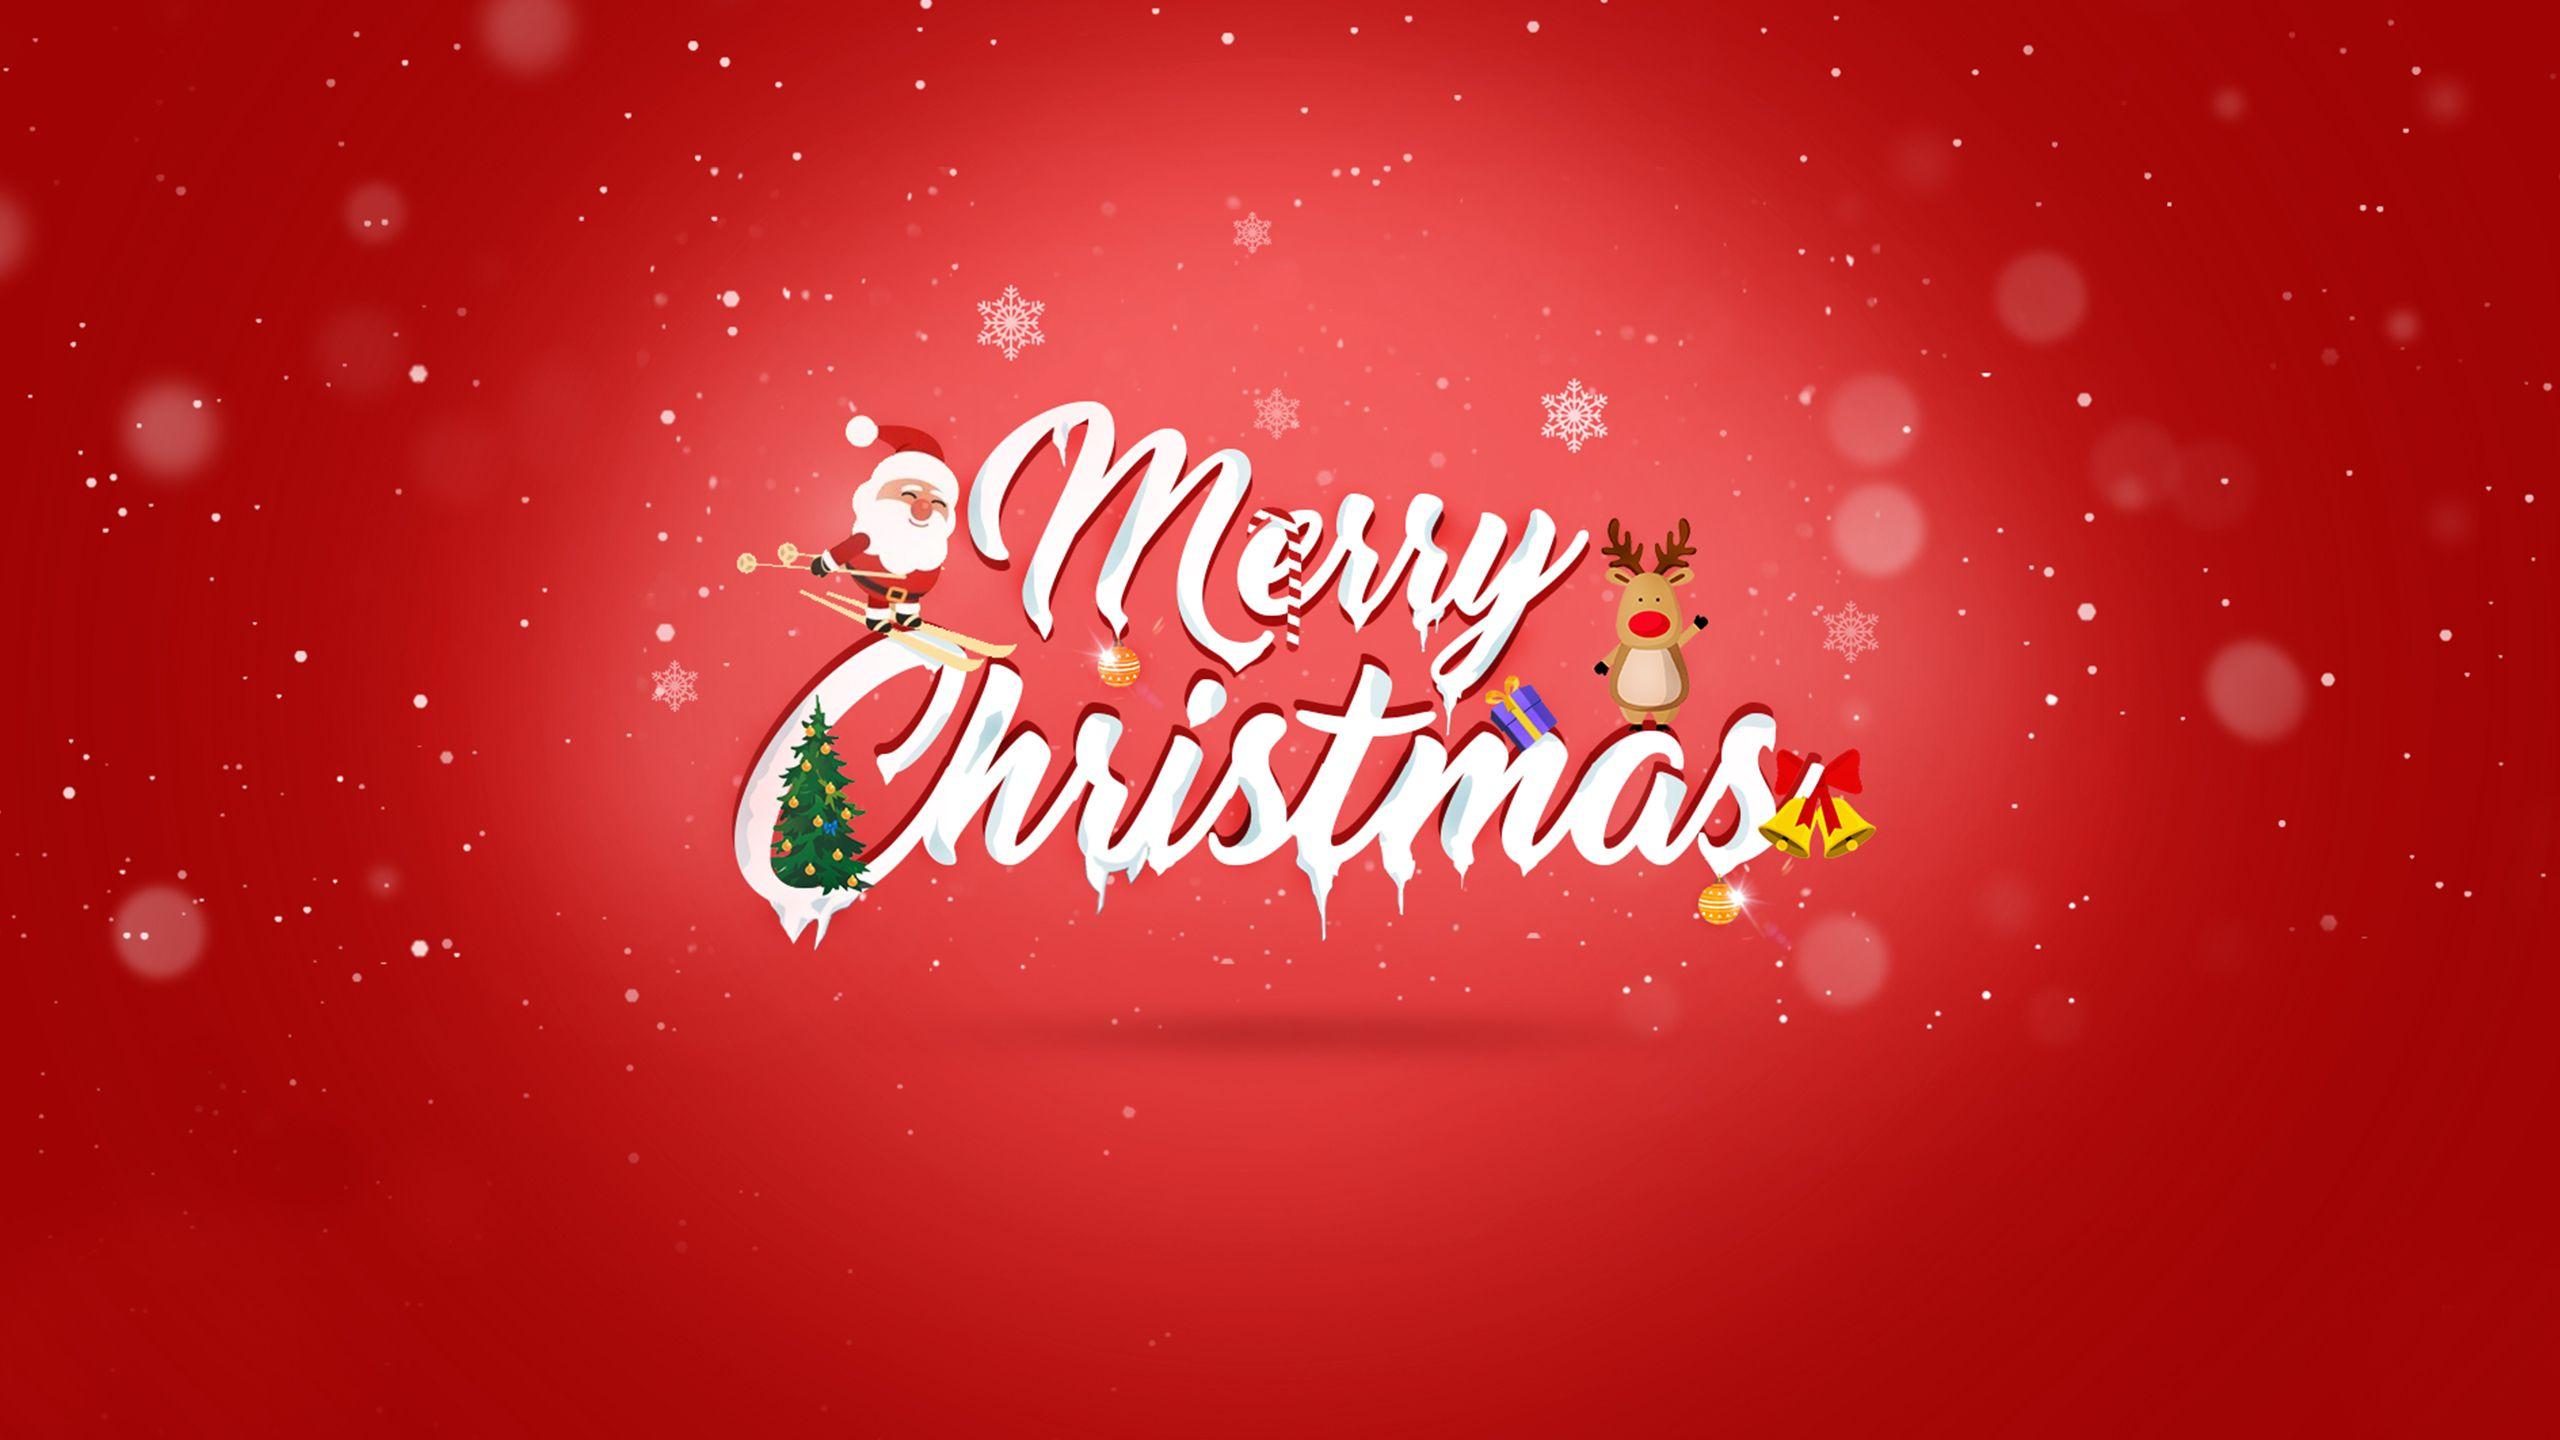 Merry Christmas HD Wallpapers - Wallpaper Cave